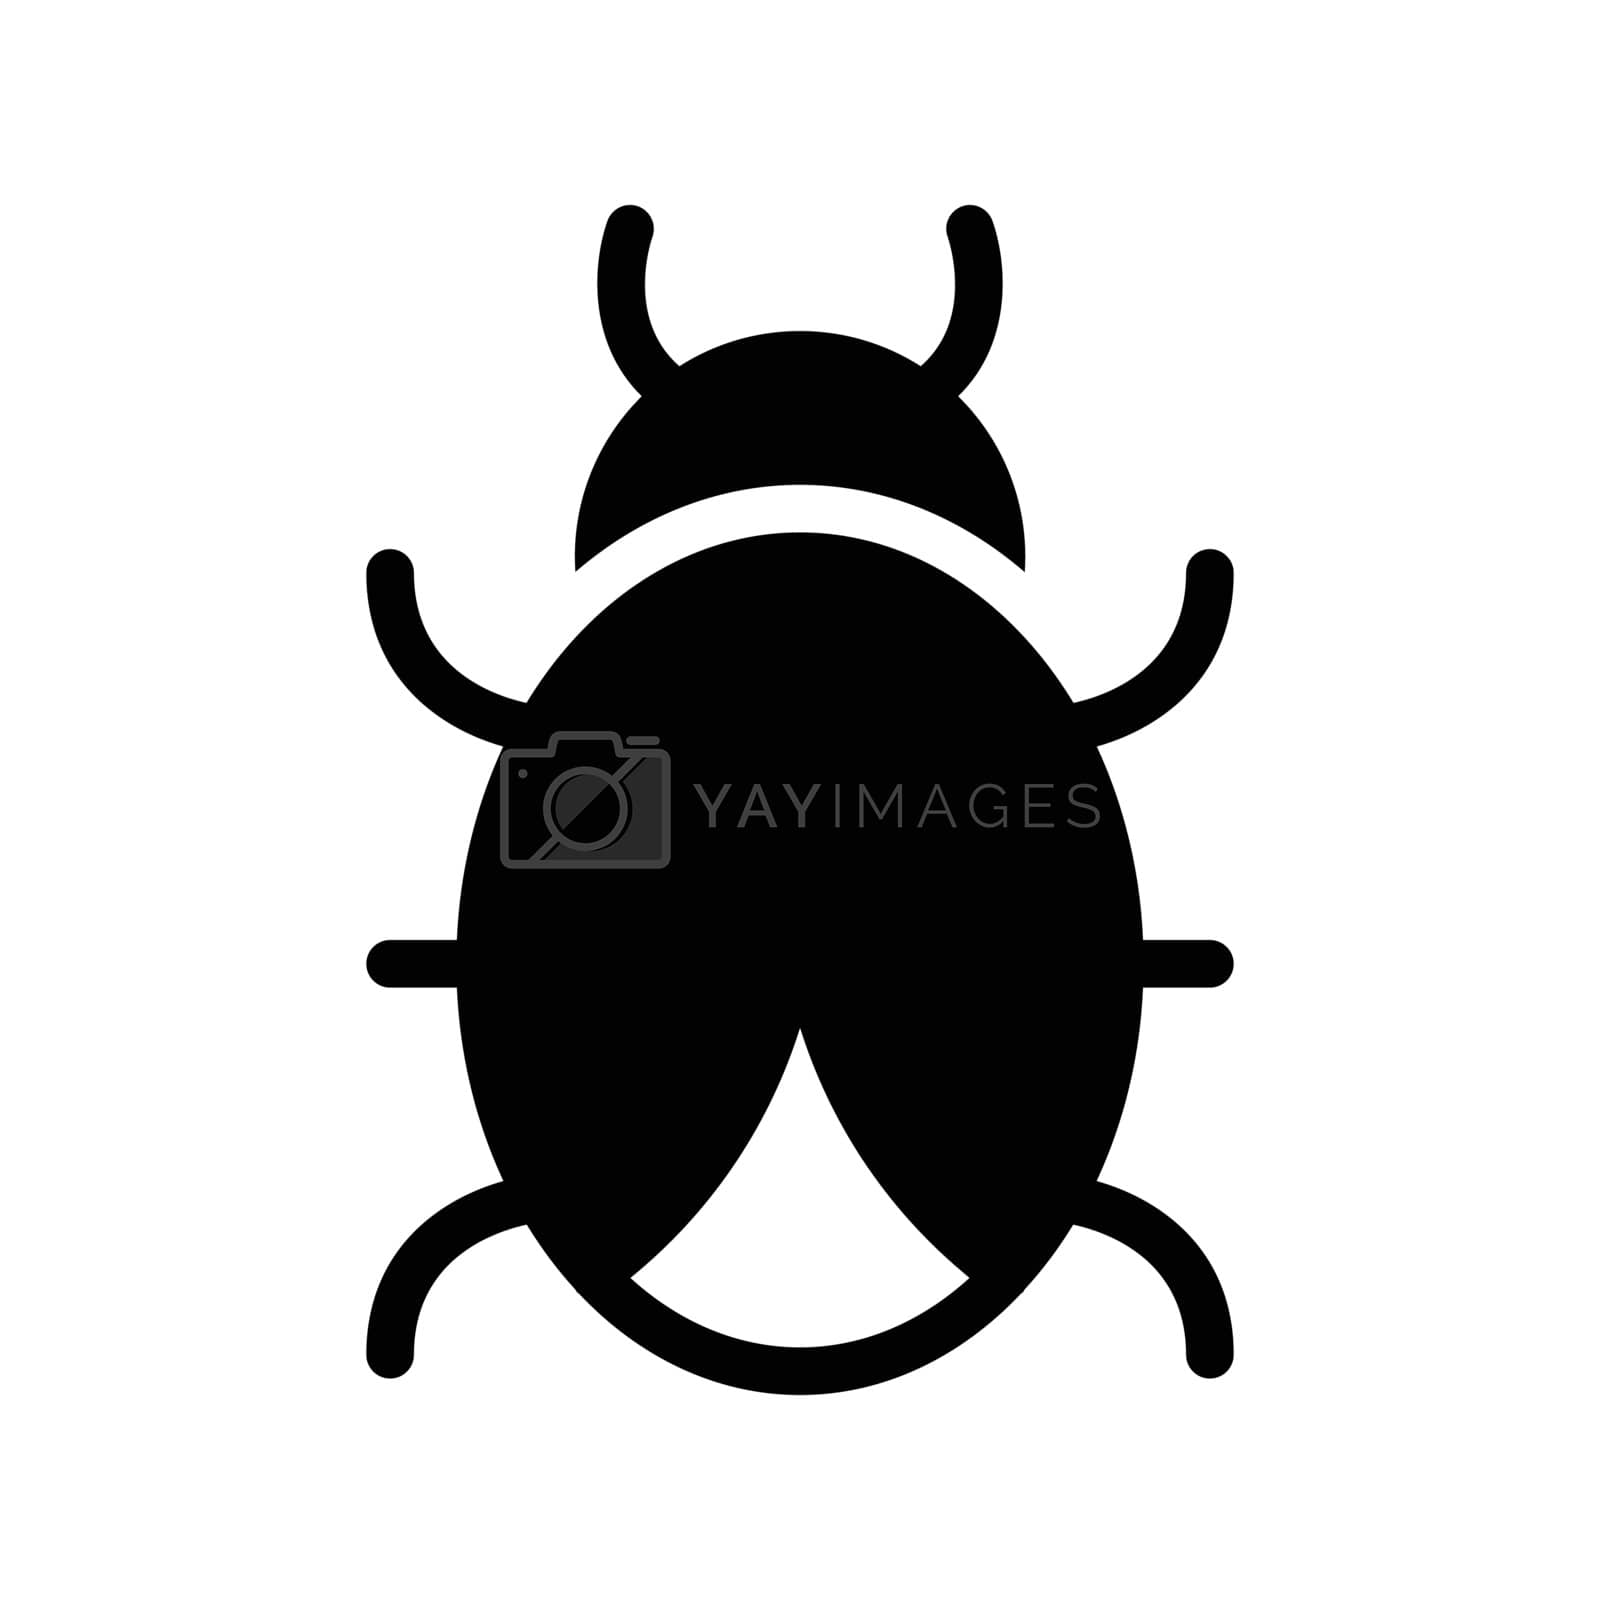 Royalty free image of bug by vectorstall